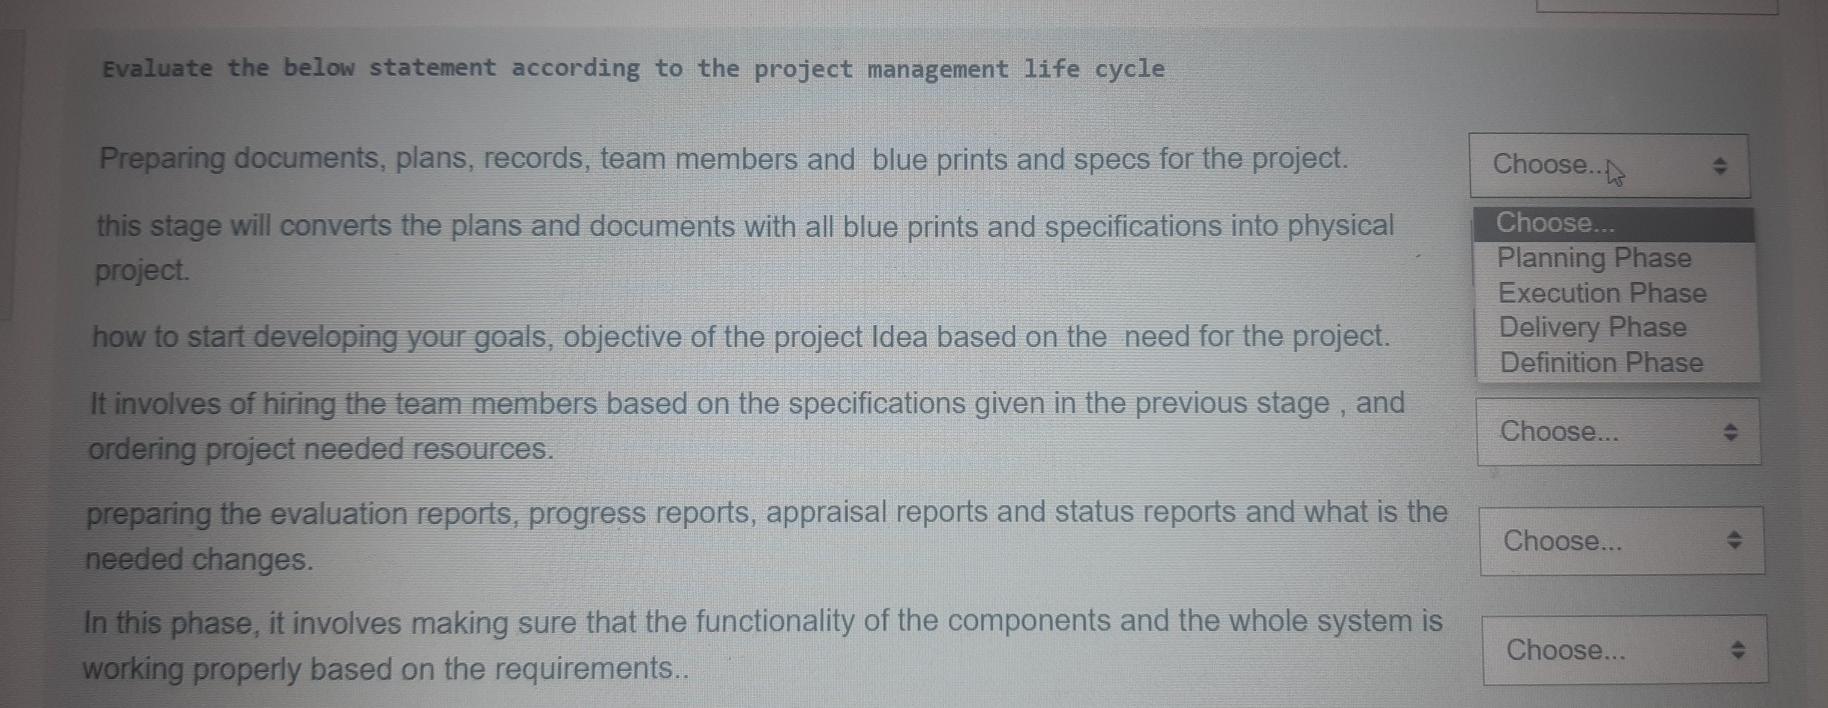 Evaluate the below statement according to the project management life cyclePreparing documents, plans, records, team members